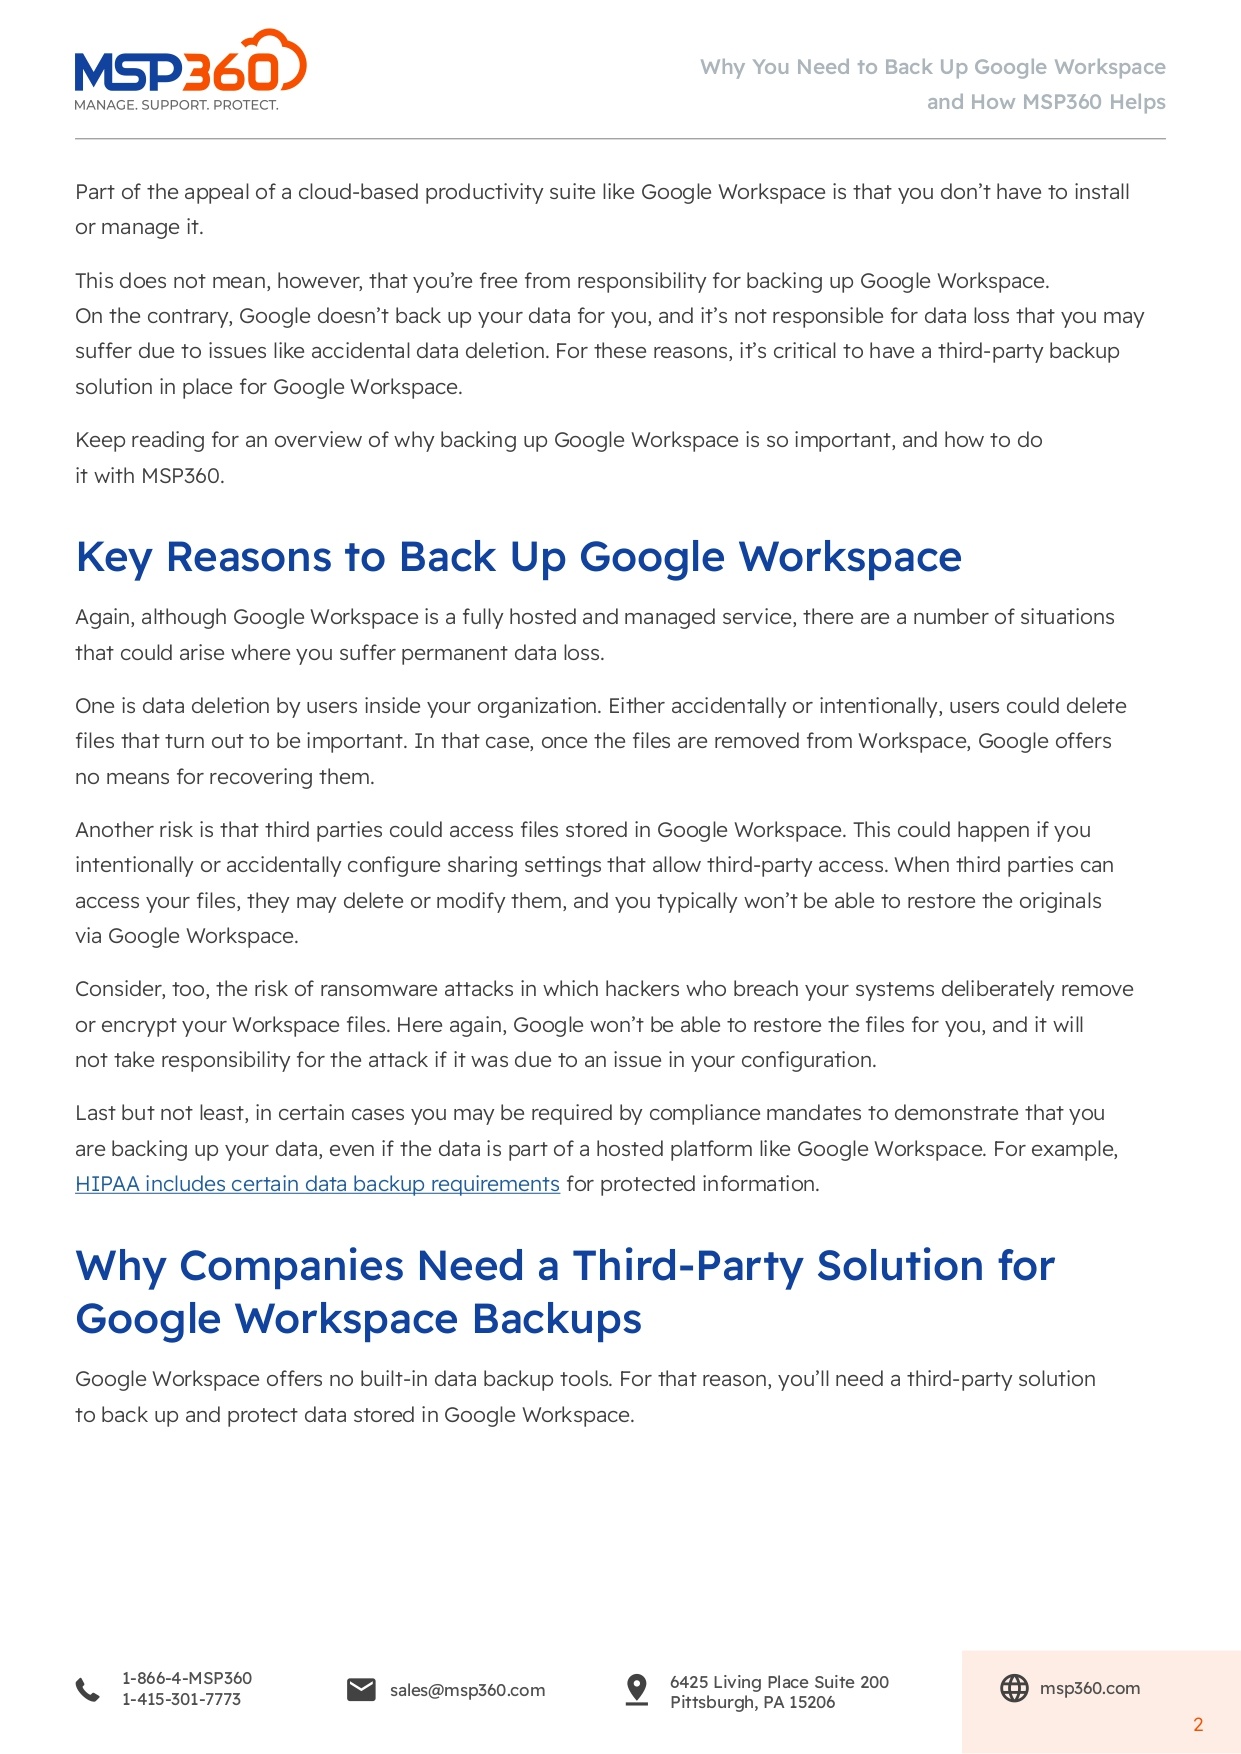 Why You Need to Back Up Google Workspace and How MSP360 Helps new_page-0002